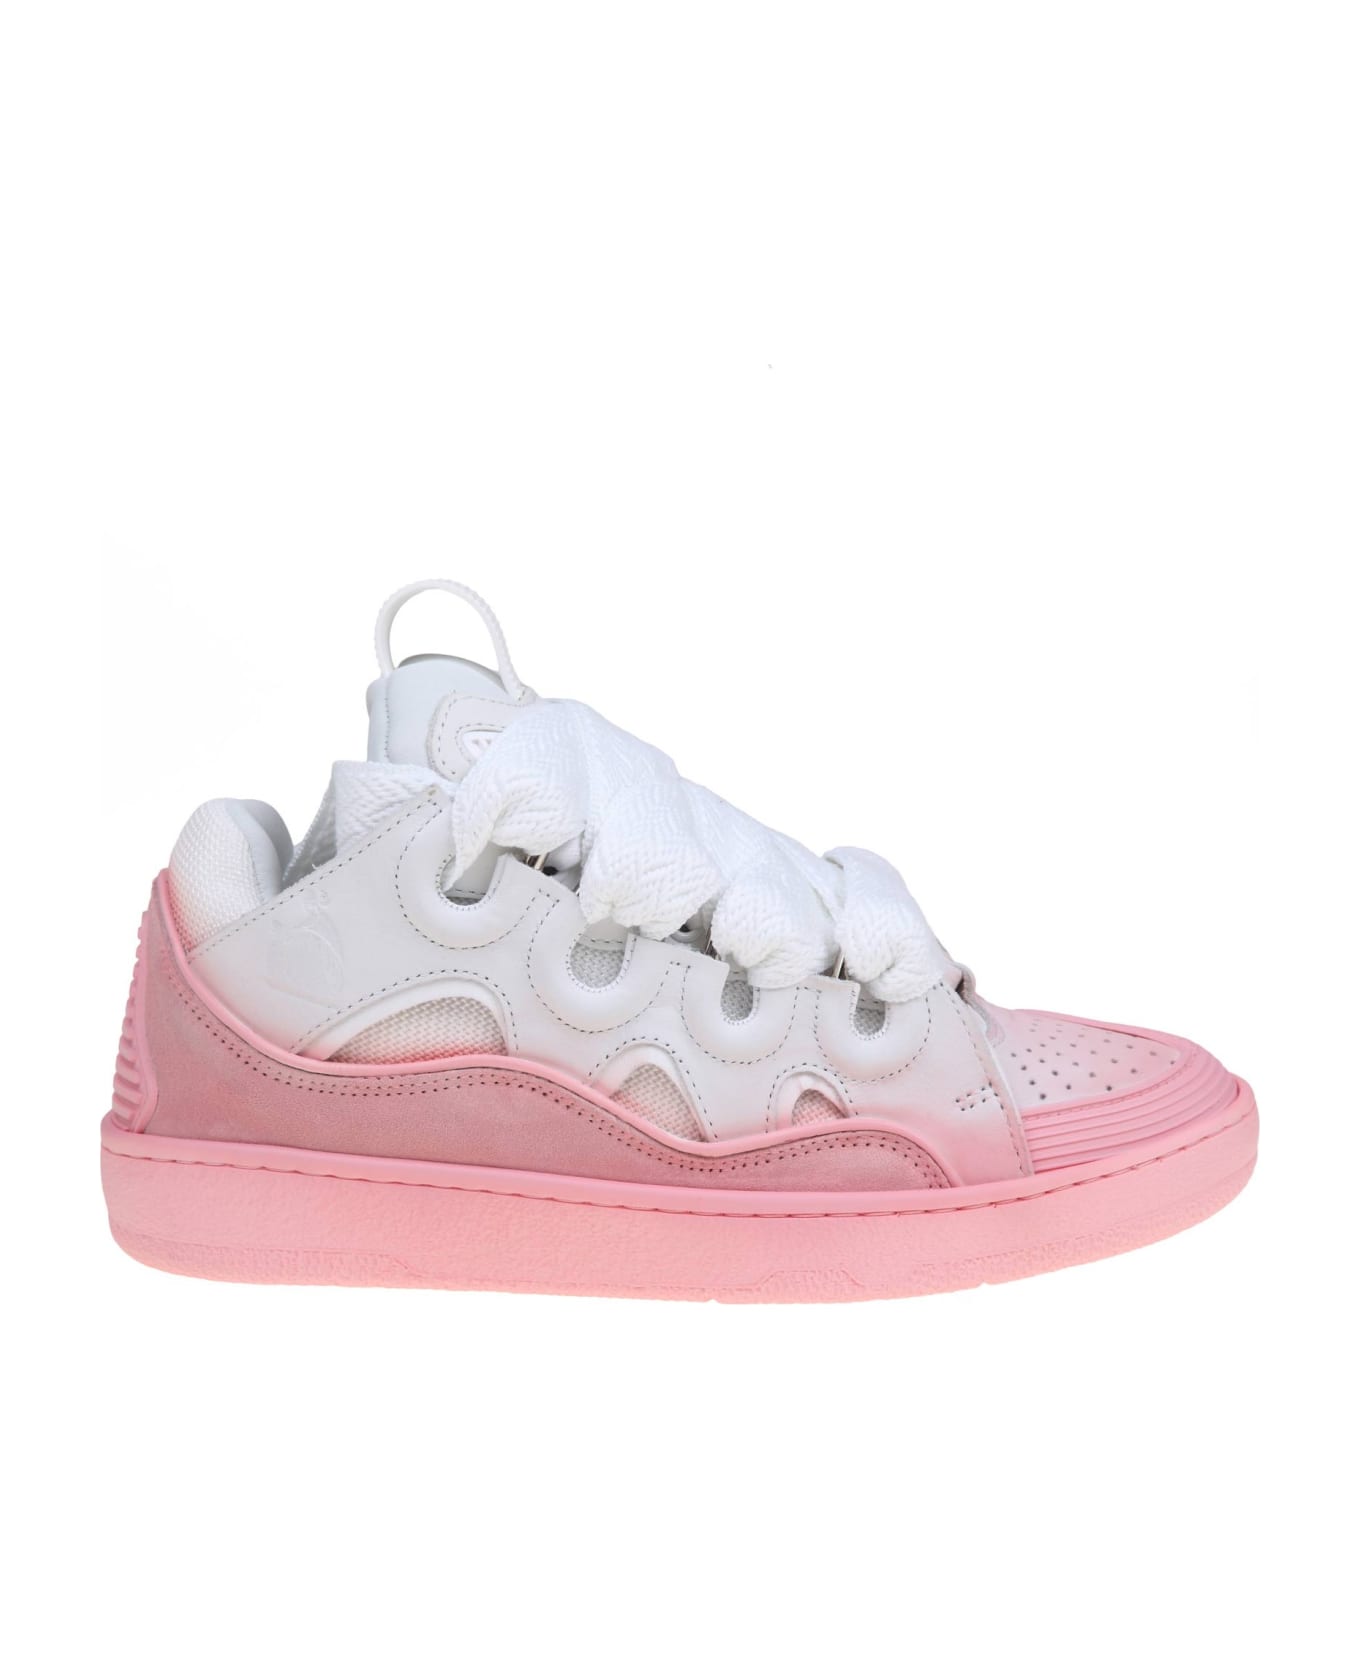 Lanvin Curb Sneakers In White And Pink Leather - Pink スニーカー